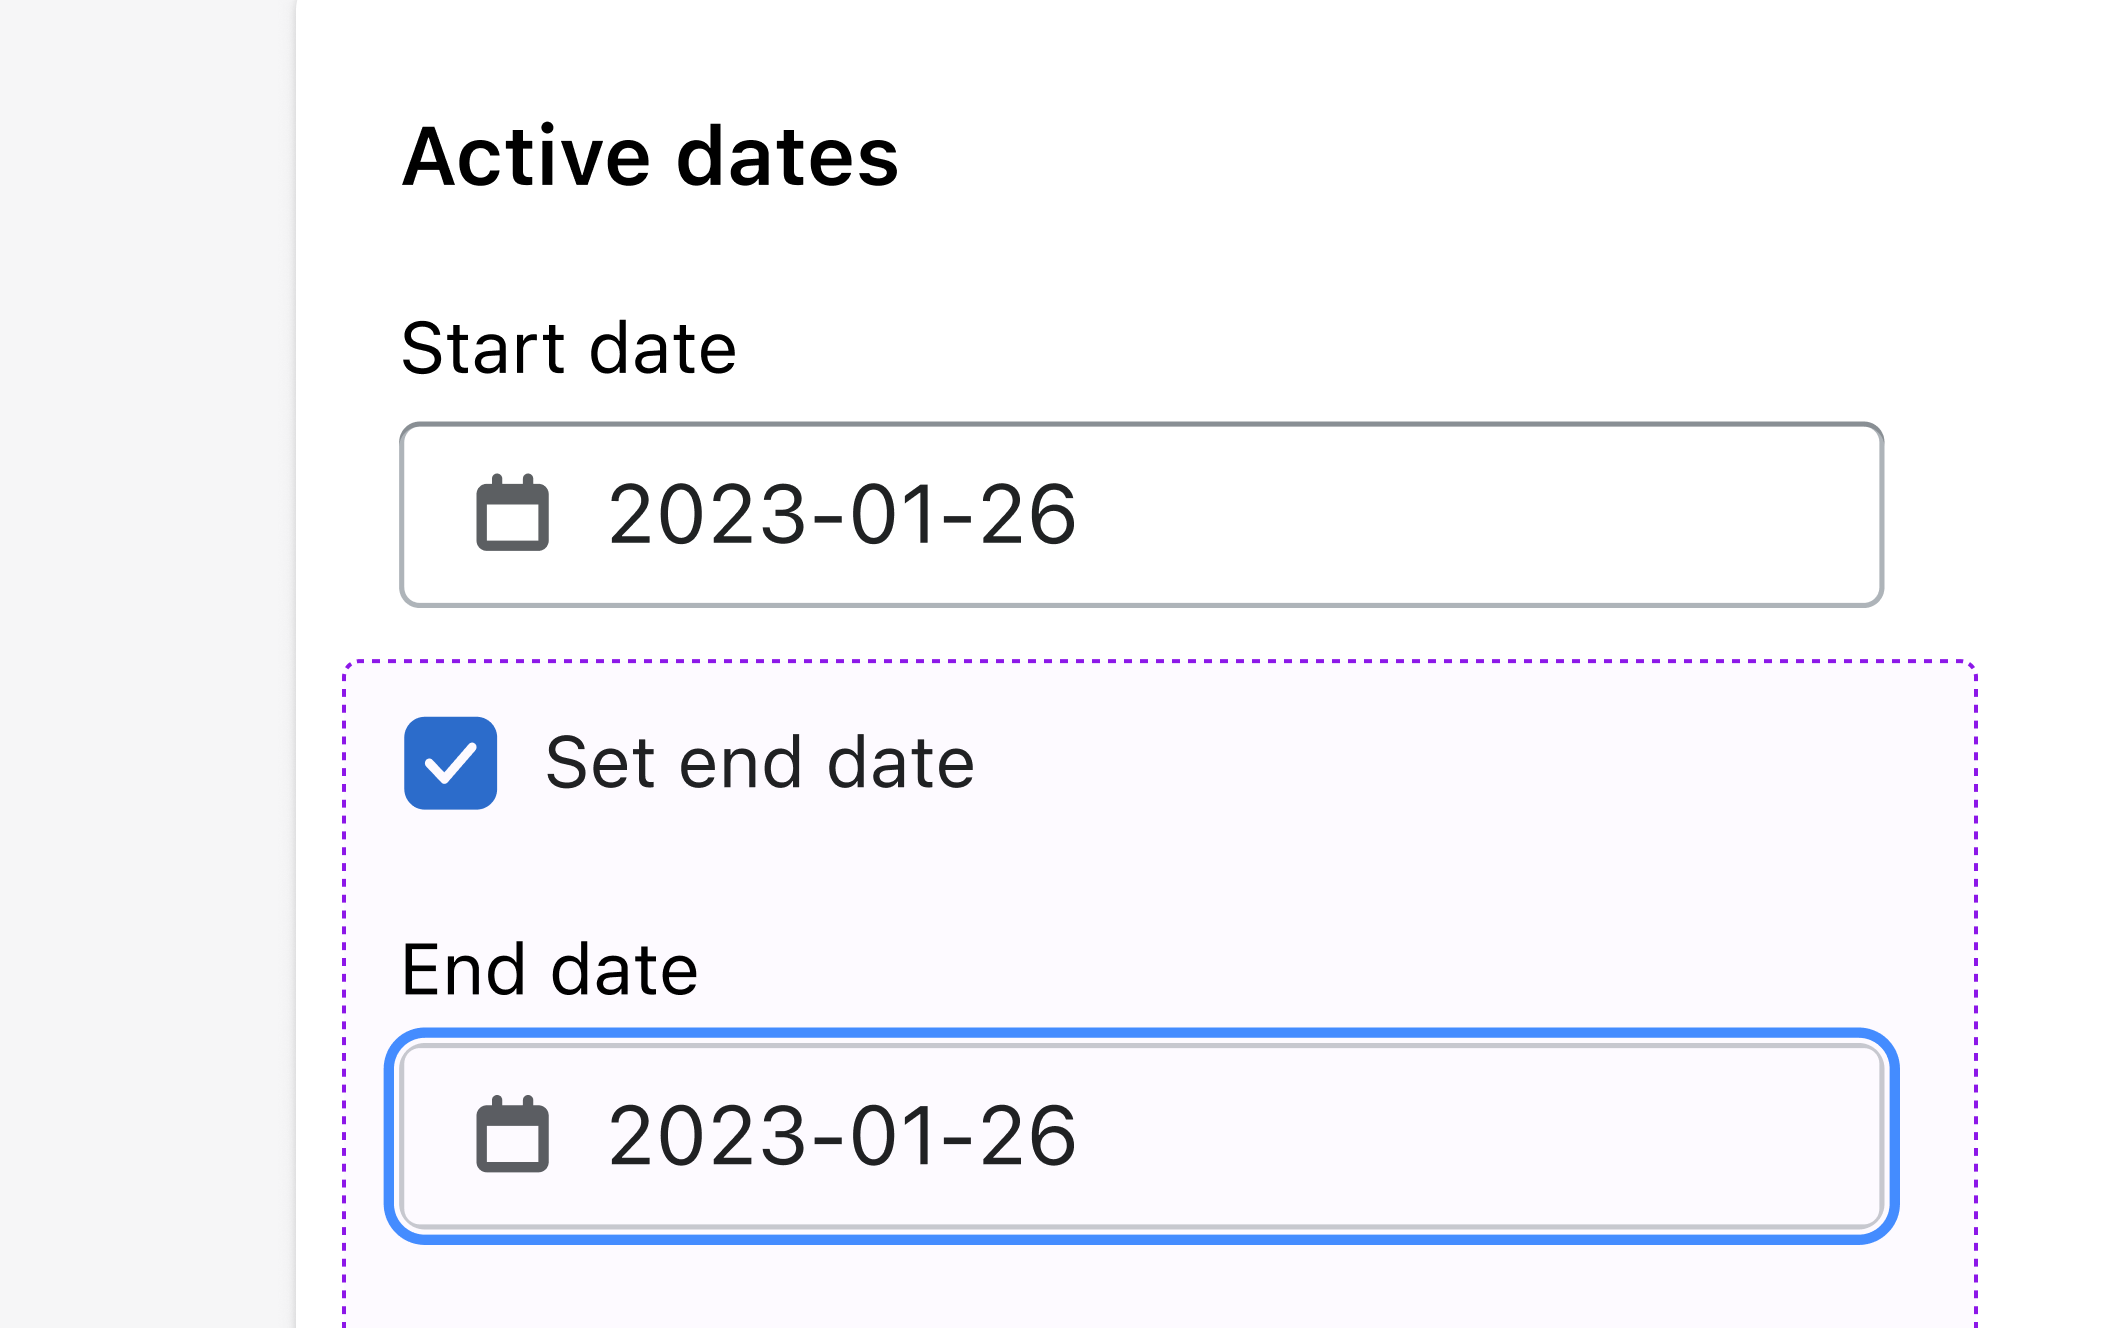 “Active dates” section with “start date” and “end date” inputs, toggled on with a “Set end date” checkbox